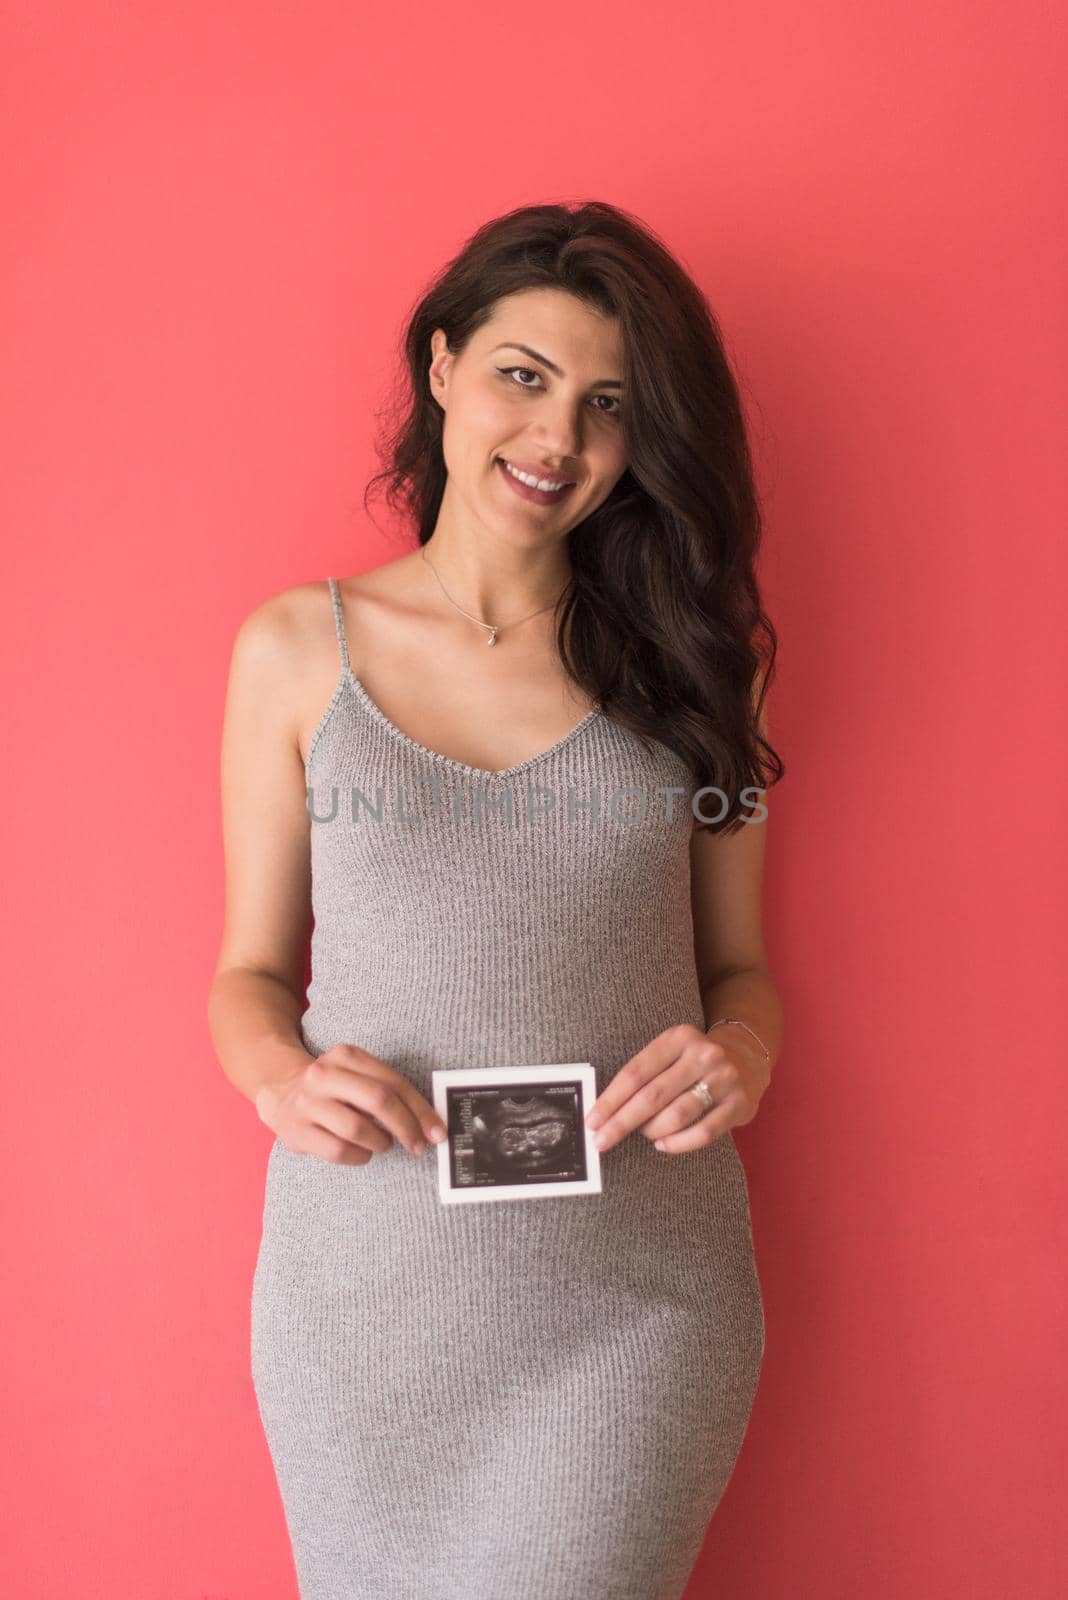 smiling pregnant woman showing ultrasound picture of her unborn baby isolated on red background